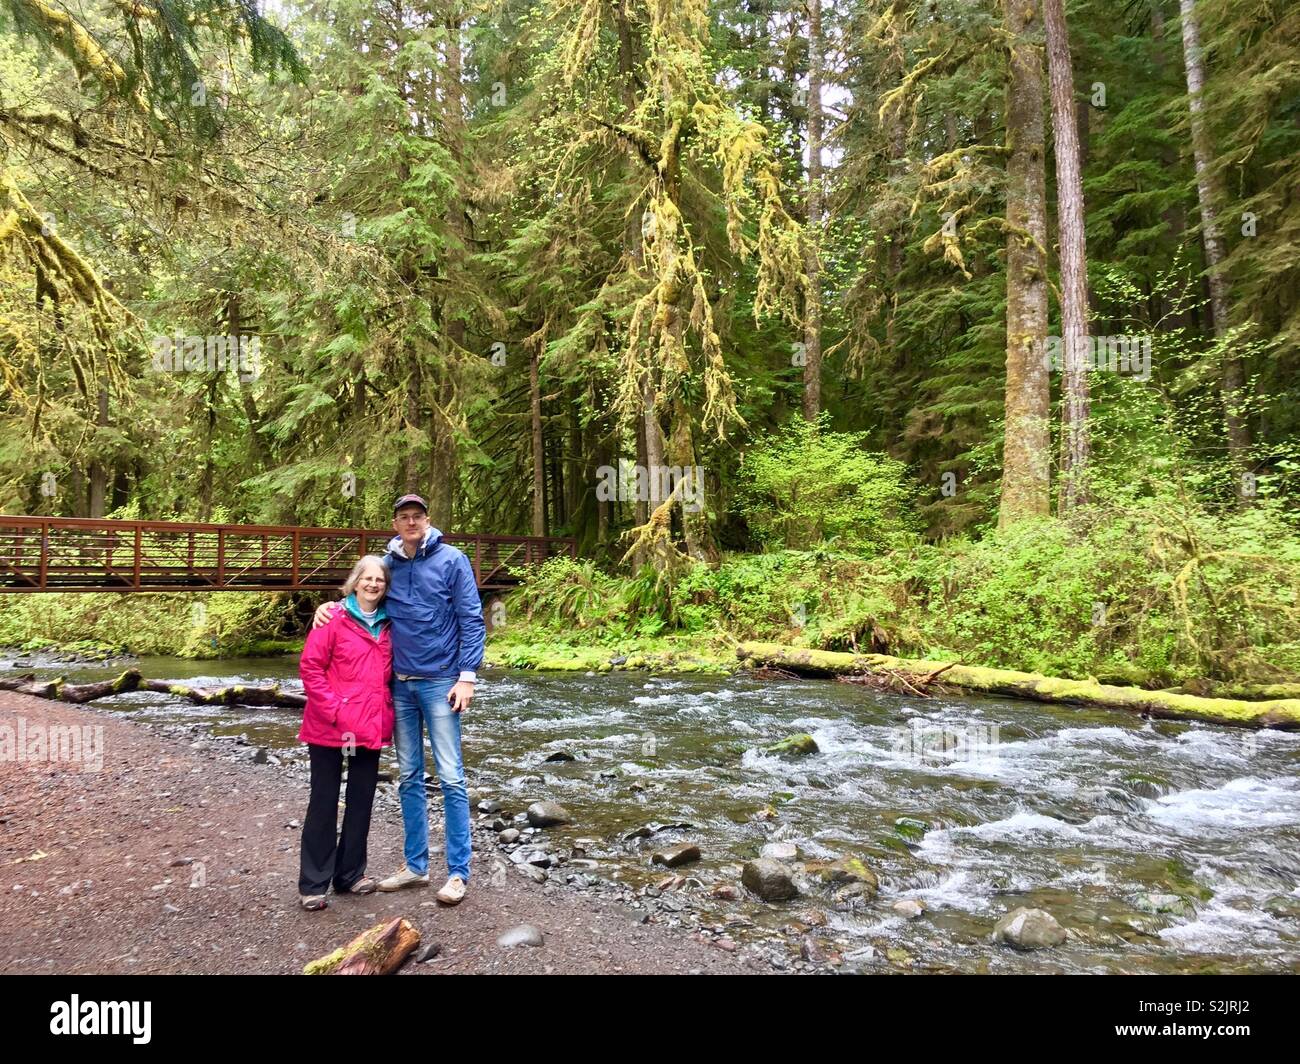 Man and woman posing in front of stream, Olympic national park, Washington Stock Photo